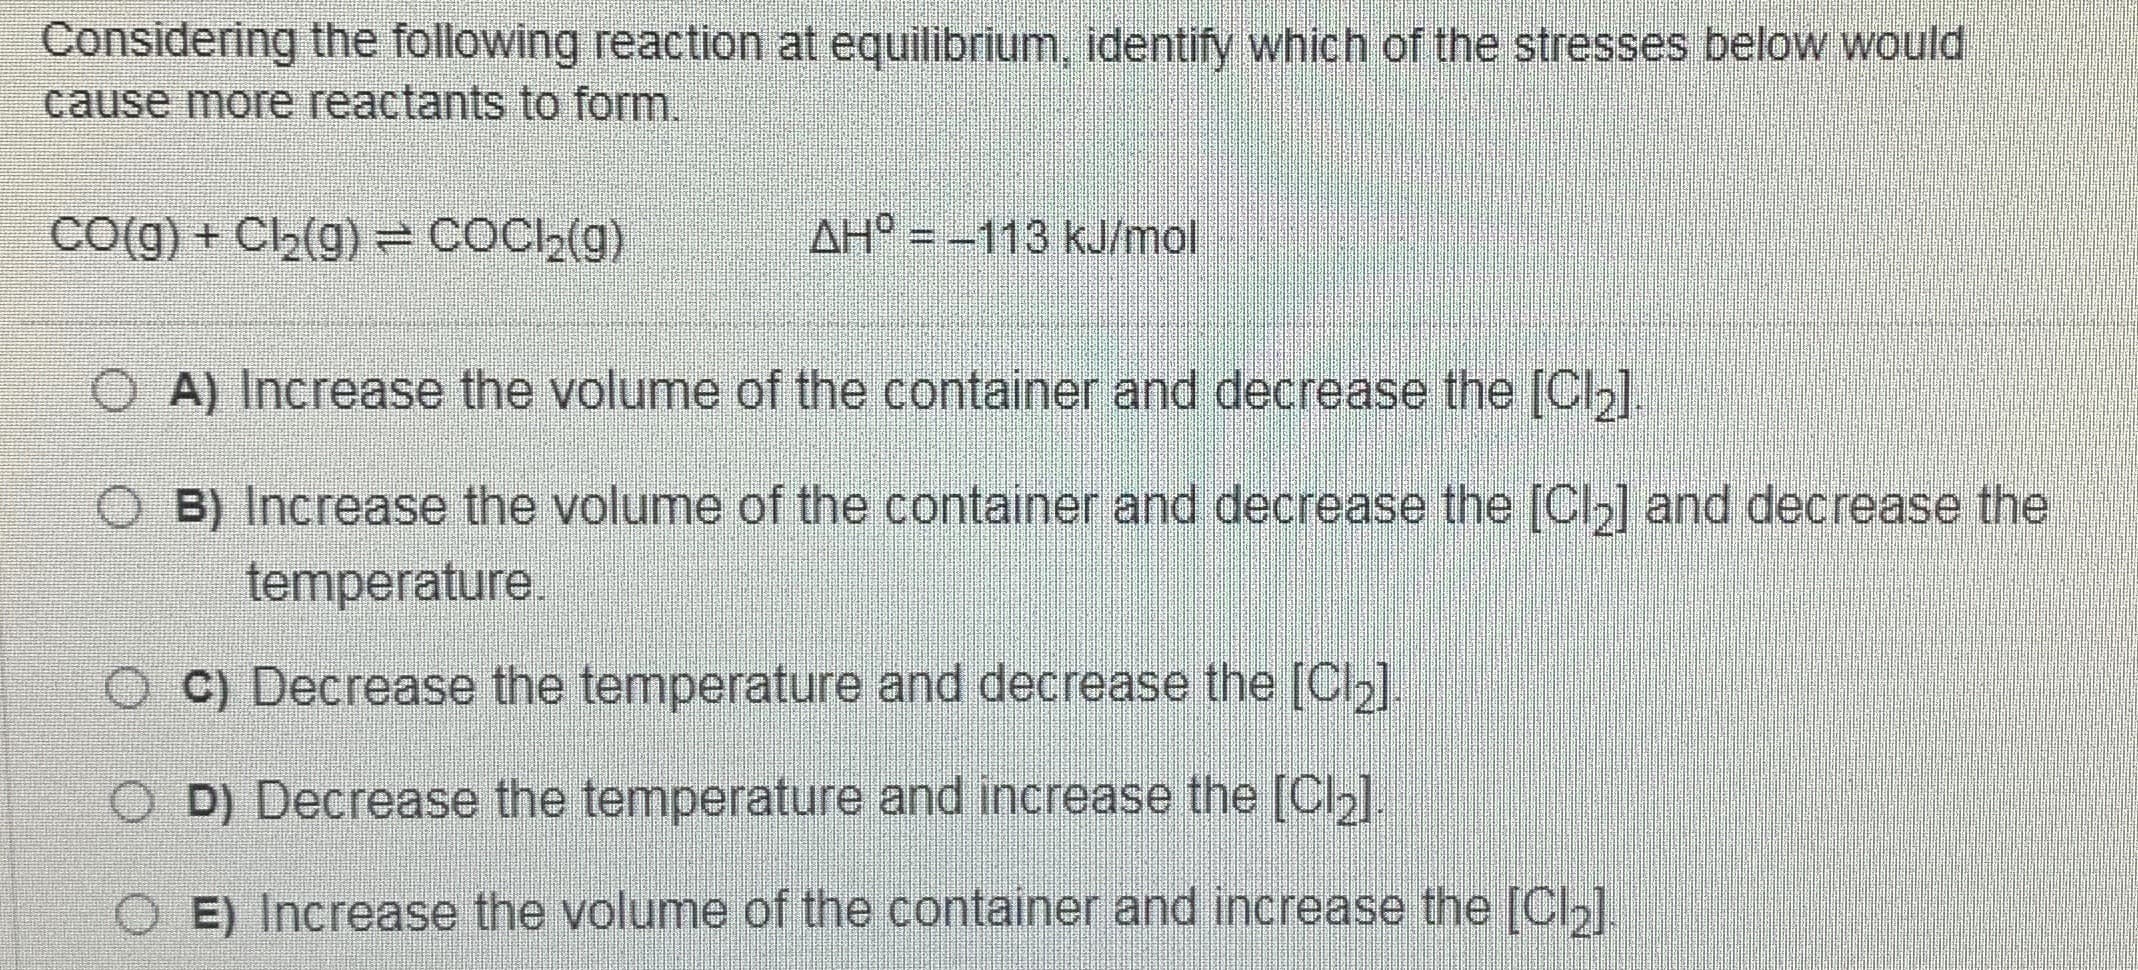 Considering the following reaction at equilibrium, identify which of the stresses below would
cause more reactants to form.
CO(g) + Cl2(g) = COCl,(g)
AH = -113 kJ/mol
A) Increase the volume of the container and decrease the [Clb].
